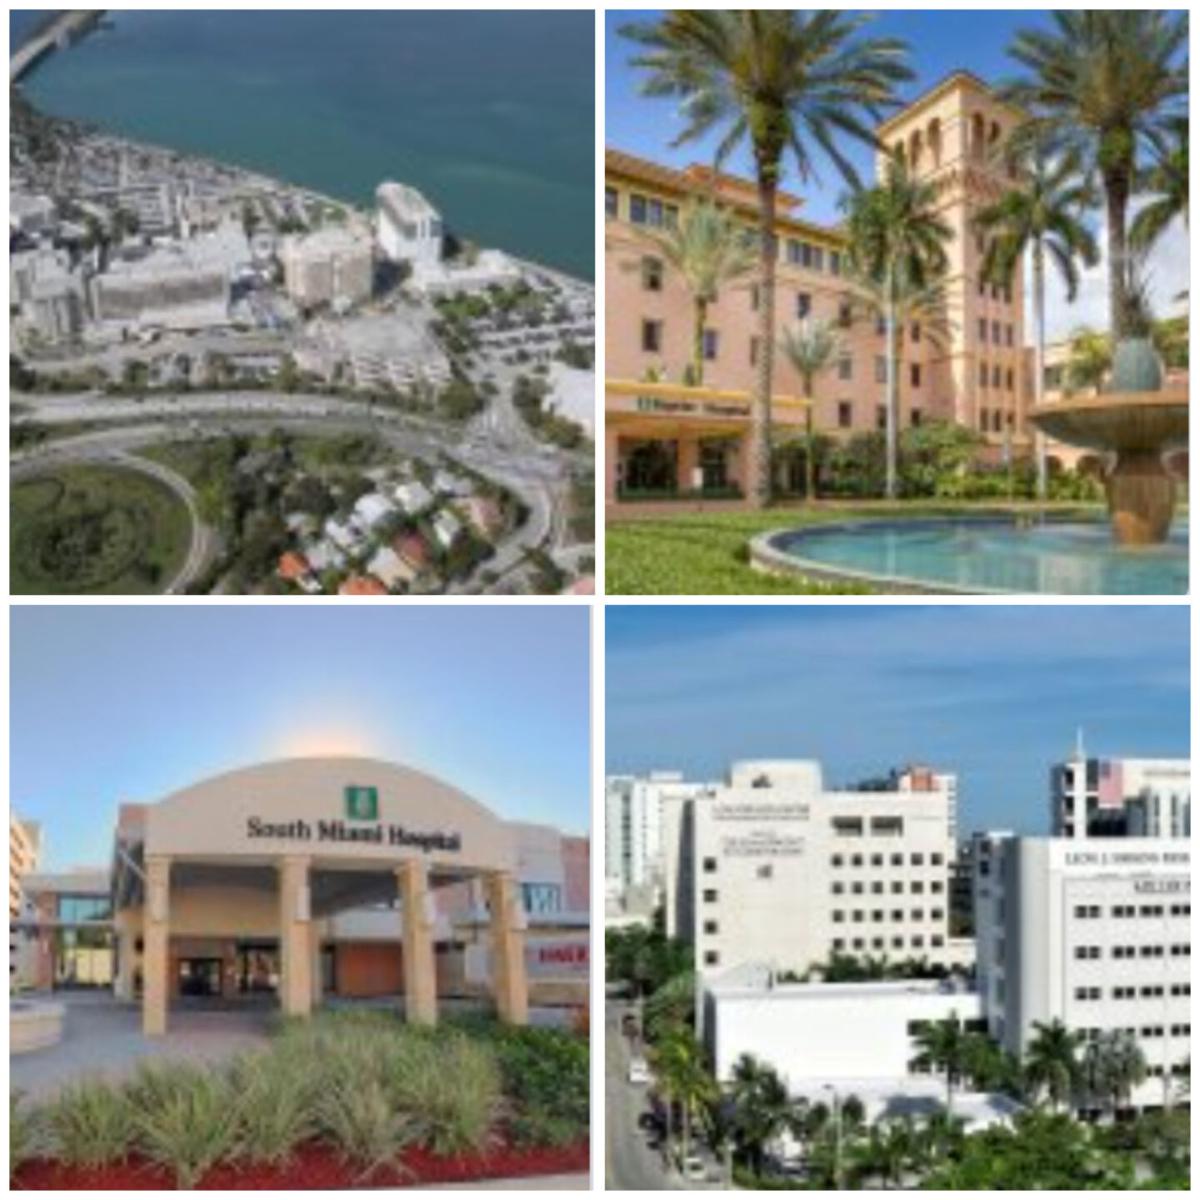 Four Miami hospitals make list of best hospitals in Florida | Health |  